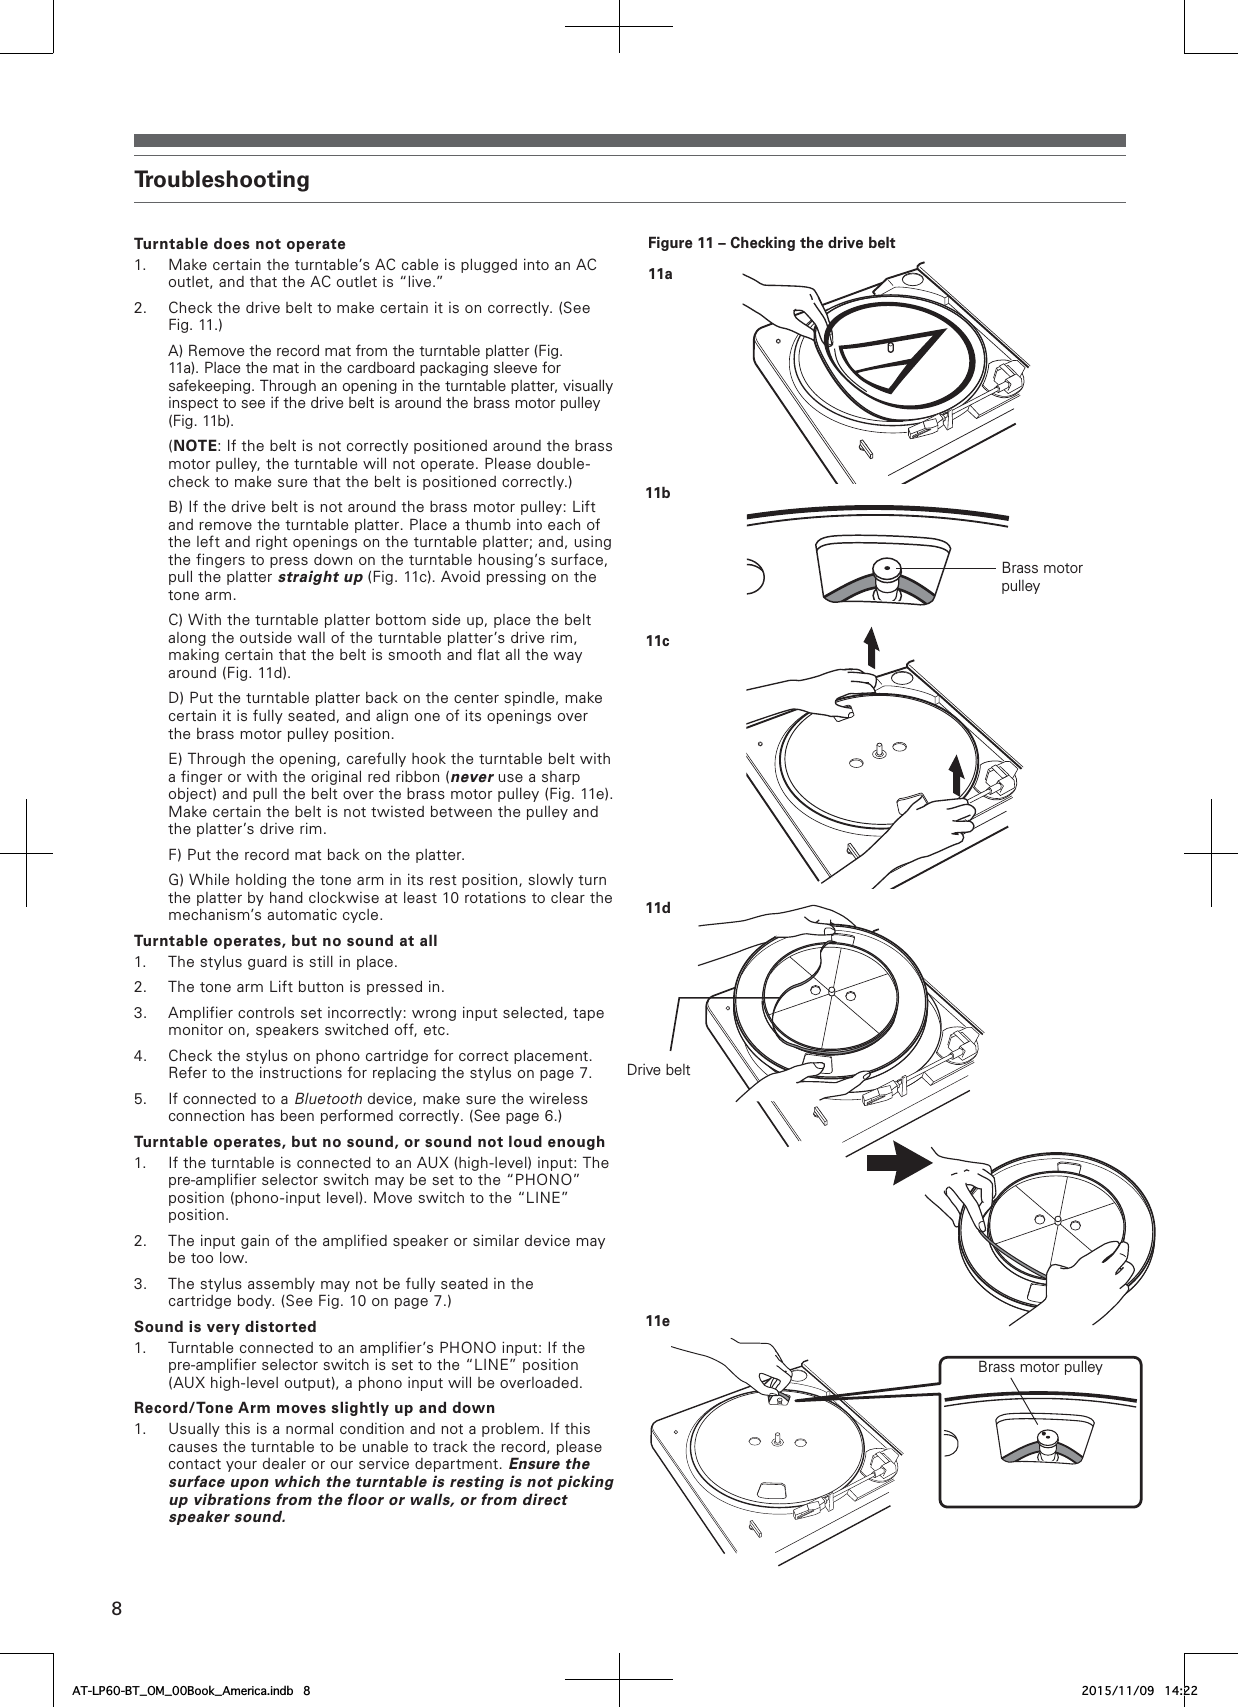 8TroubleshootingTurntable does not operate1. Make certain the turntable’s AC cable is plugged into an AC outlet, and that the AC outlet is “live.”2. Check the drive belt to make certain it is on correctly. (See Fig. 11.)    A) Remove the record mat from the turntable platter (Fig. 11a). Place the mat in the cardboard packaging sleeve for safekeeping. Through an opening in the turntable platter, visually inspect to see if the drive belt is around the brass motor pulley (Fig. 11b).(NOTE: If the belt is not correctly positioned around the brass motor pulley, the turntable will not operate. Please double-check to make sure that the belt is positioned correctly.)    B) If the drive belt is not around the brass motor pulley: Lift and remove the turntable platter. Place a thumb into each of the left and right openings on the turntable platter; and, using the fingers to press down on the turntable housing’s surface, pull the platter straight up (Fig. 11c). Avoid pressing on the tone arm.    C) With the turntable platter bottom side up, place the belt along the outside wall of the turntable platter’s drive rim, making certain that the belt is smooth and flat all the way around (Fig. 11d).    D) Put the turntable platter back on the center spindle, make certain it is fully seated, and align one of its openings over the brass motor pulley position.    E) Through the opening, carefully hook the turntable belt with a finger or with the original red ribbon (never use a sharp object) and pull the belt over the brass motor pulley (Fig. 11e). Make certain the belt is not twisted between the pulley and the platter’s drive rim.    F) Put the record mat back on the platter.    G) While holding the tone arm in its rest position, slowly turn the platter by hand clockwise at least 10 rotations to clear the mechanism’s automatic cycle.Turntable operates, but no sound at all1. The stylus guard is still in place.2. The tone arm Lift button is pressed in.3. Amplifier controls set incorrectly: wrong input selected, tape monitor on, speakers switched off, etc.4. Check the stylus on phono cartridge for correct placement. Refer to the instructions for replacing the stylus on page 7.5. If connected to a Bluetooth device, make sure the wireless connection has been performed correctly. (See page 6.)Turntable operates, but no sound, or sound not loud enough1. If the turntable is connected to an AUX (high-level) input: The pre-amplifier selector switch may be set to the “PHONO” position (phono-input level). Move switch to the “LINE” position.2. The input gain of the amplified speaker or similar device may be too low.3. The stylus assembly may not be fully seated in the cartridge body. (See Fig. 10 on page 7.)Sound is very distorted1. Turntable connected to an amplifier’s PHONO input: If the pre-amplifier selector switch is set to the “LINE” position (AUX high-level output), a phono input will be overloaded.Record/Tone Arm moves slightly up and down1. Usually this is a normal condition and not a problem. If this causes the turntable to be unable to track the record, please contact your dealer or our service department. Ensure the surface upon which the turntable is resting is not picking up vibrations from the floor or walls, or from direct speaker sound.Figure 11 – Checking the drive belt11a11b11c11dDrive belt11eBrass motor pulleyBrass motor pulleyAT-LP60-BT_OM_00Book_America.indb   8 2015/11/09   14:22